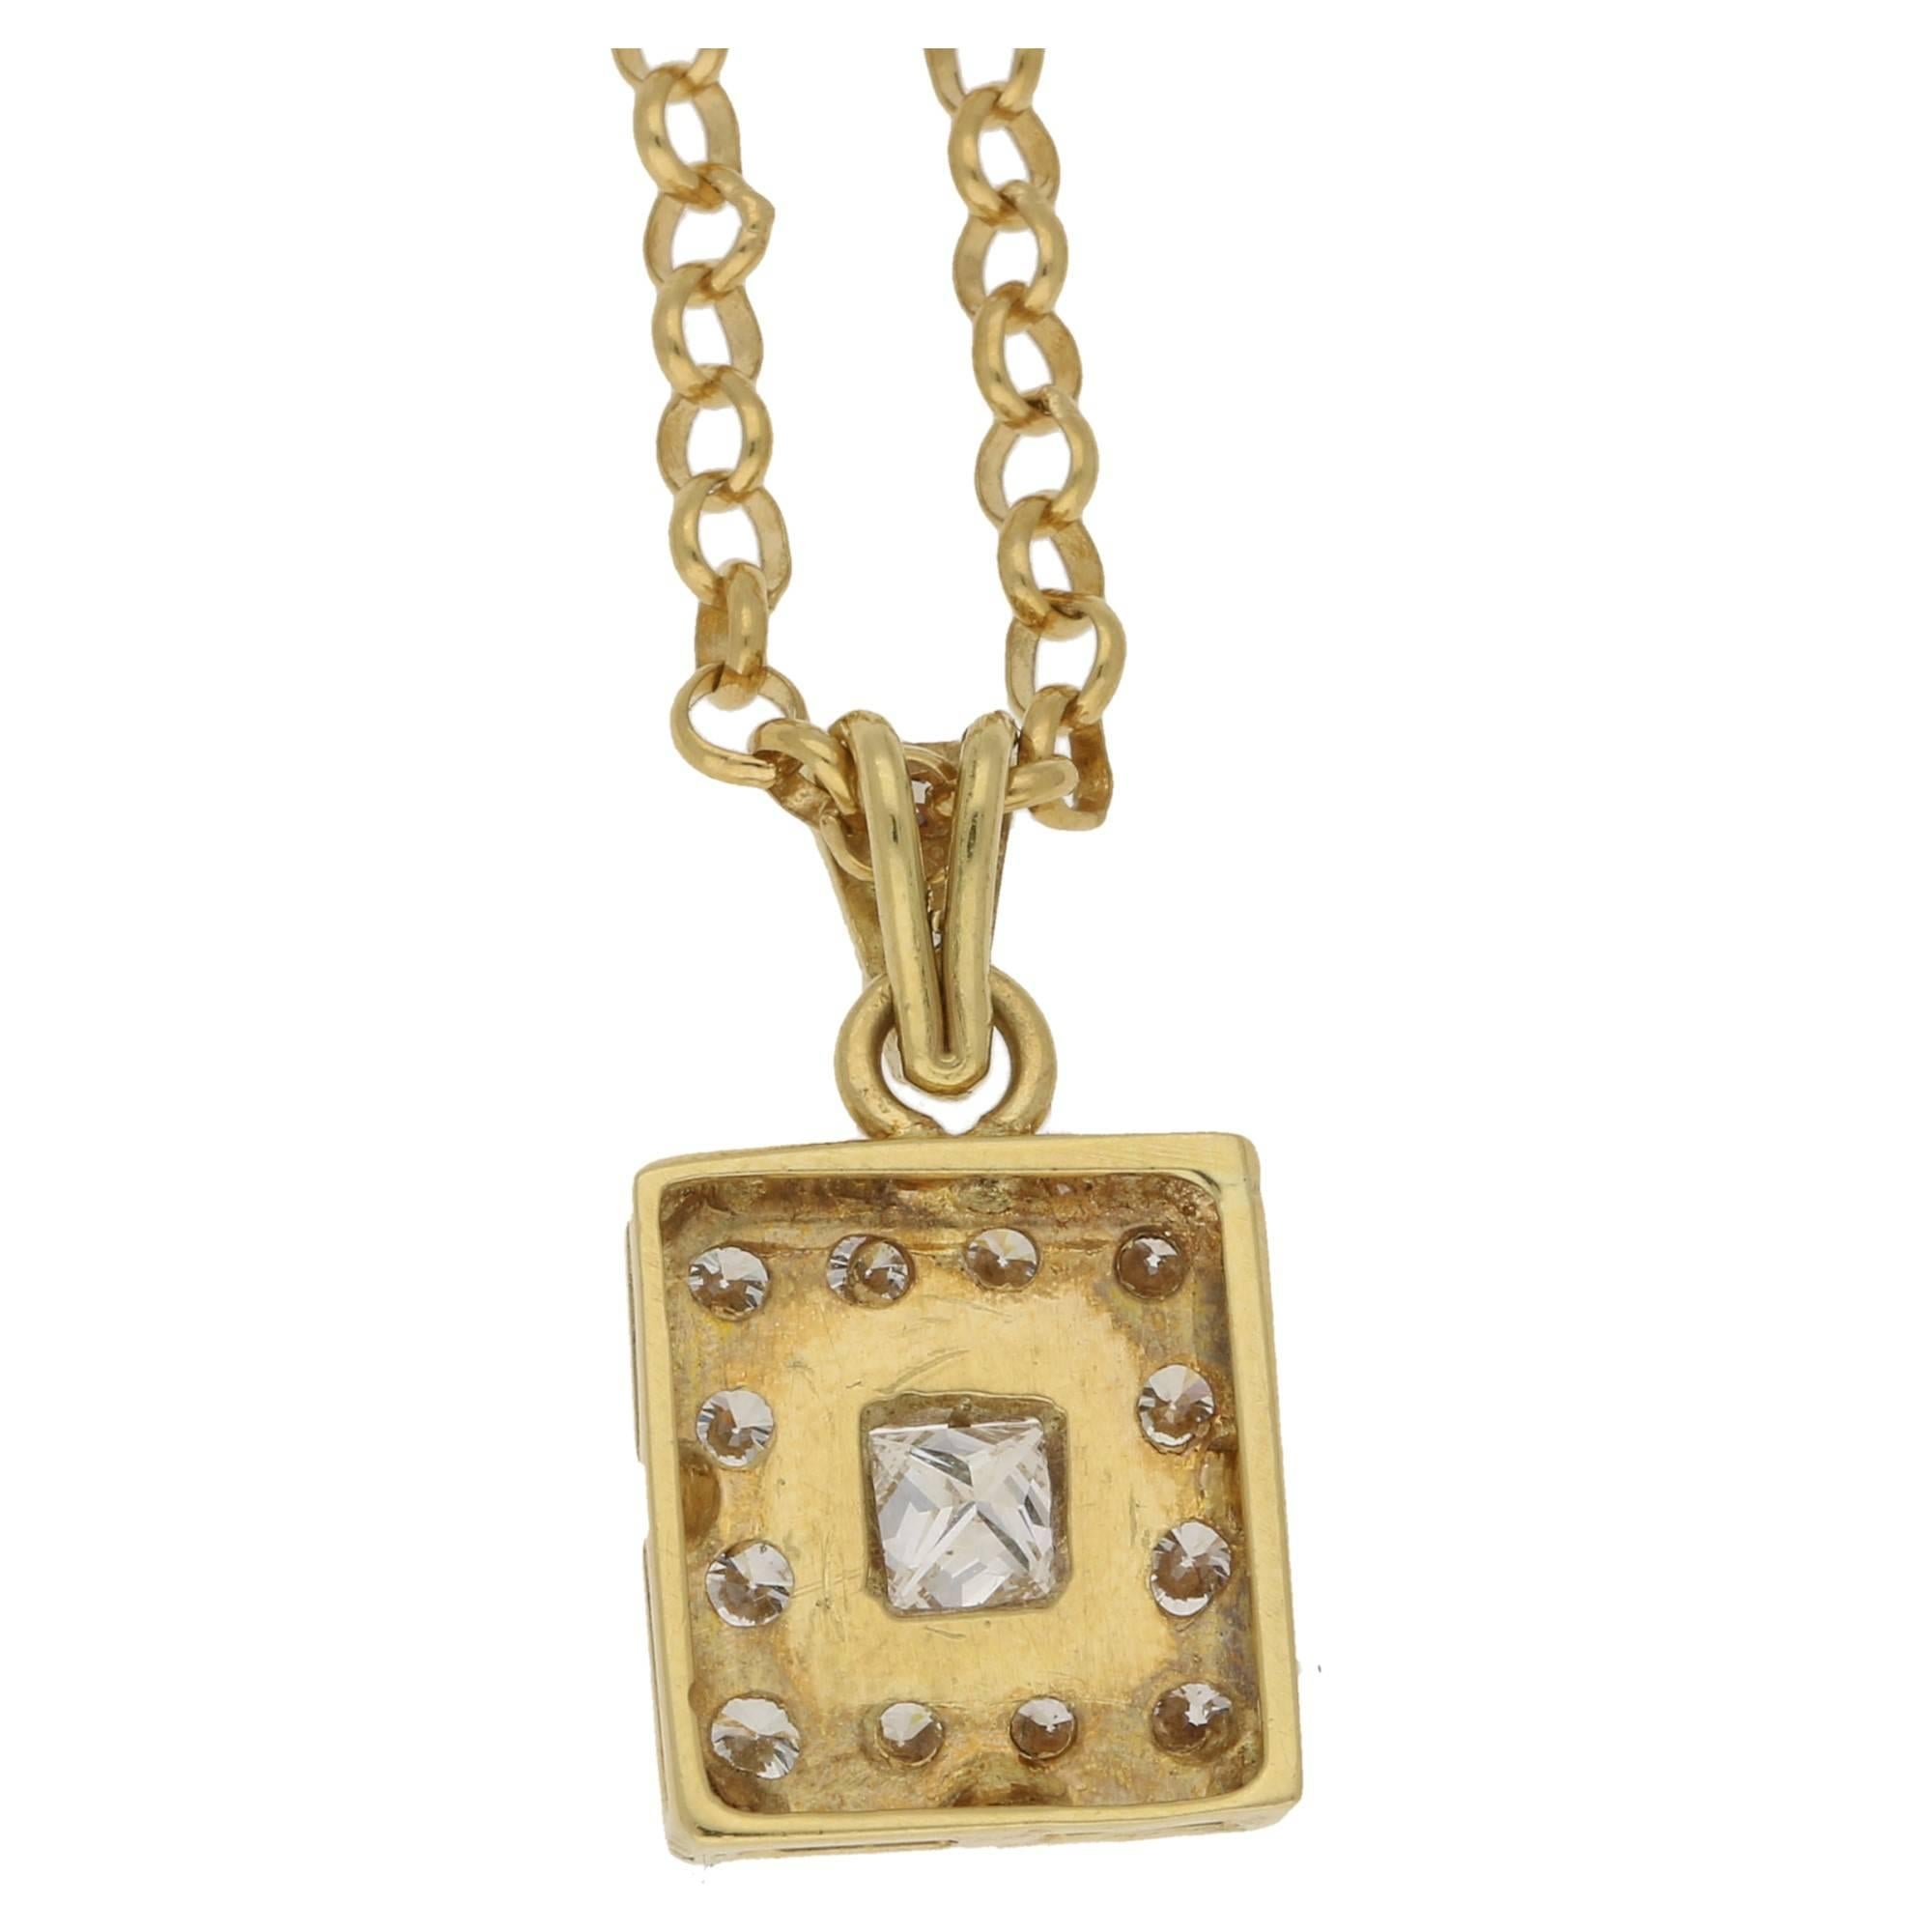 A quirky 18k yellow gold and diamond pendant on chain. The central princess cut diamond measures 0.3cts, is F-G colour and has a clarity of VS. This is surrounded by 0.5cts of round brilliant cut diamonds also F-G, VS clarity. Hallmarked 750. The